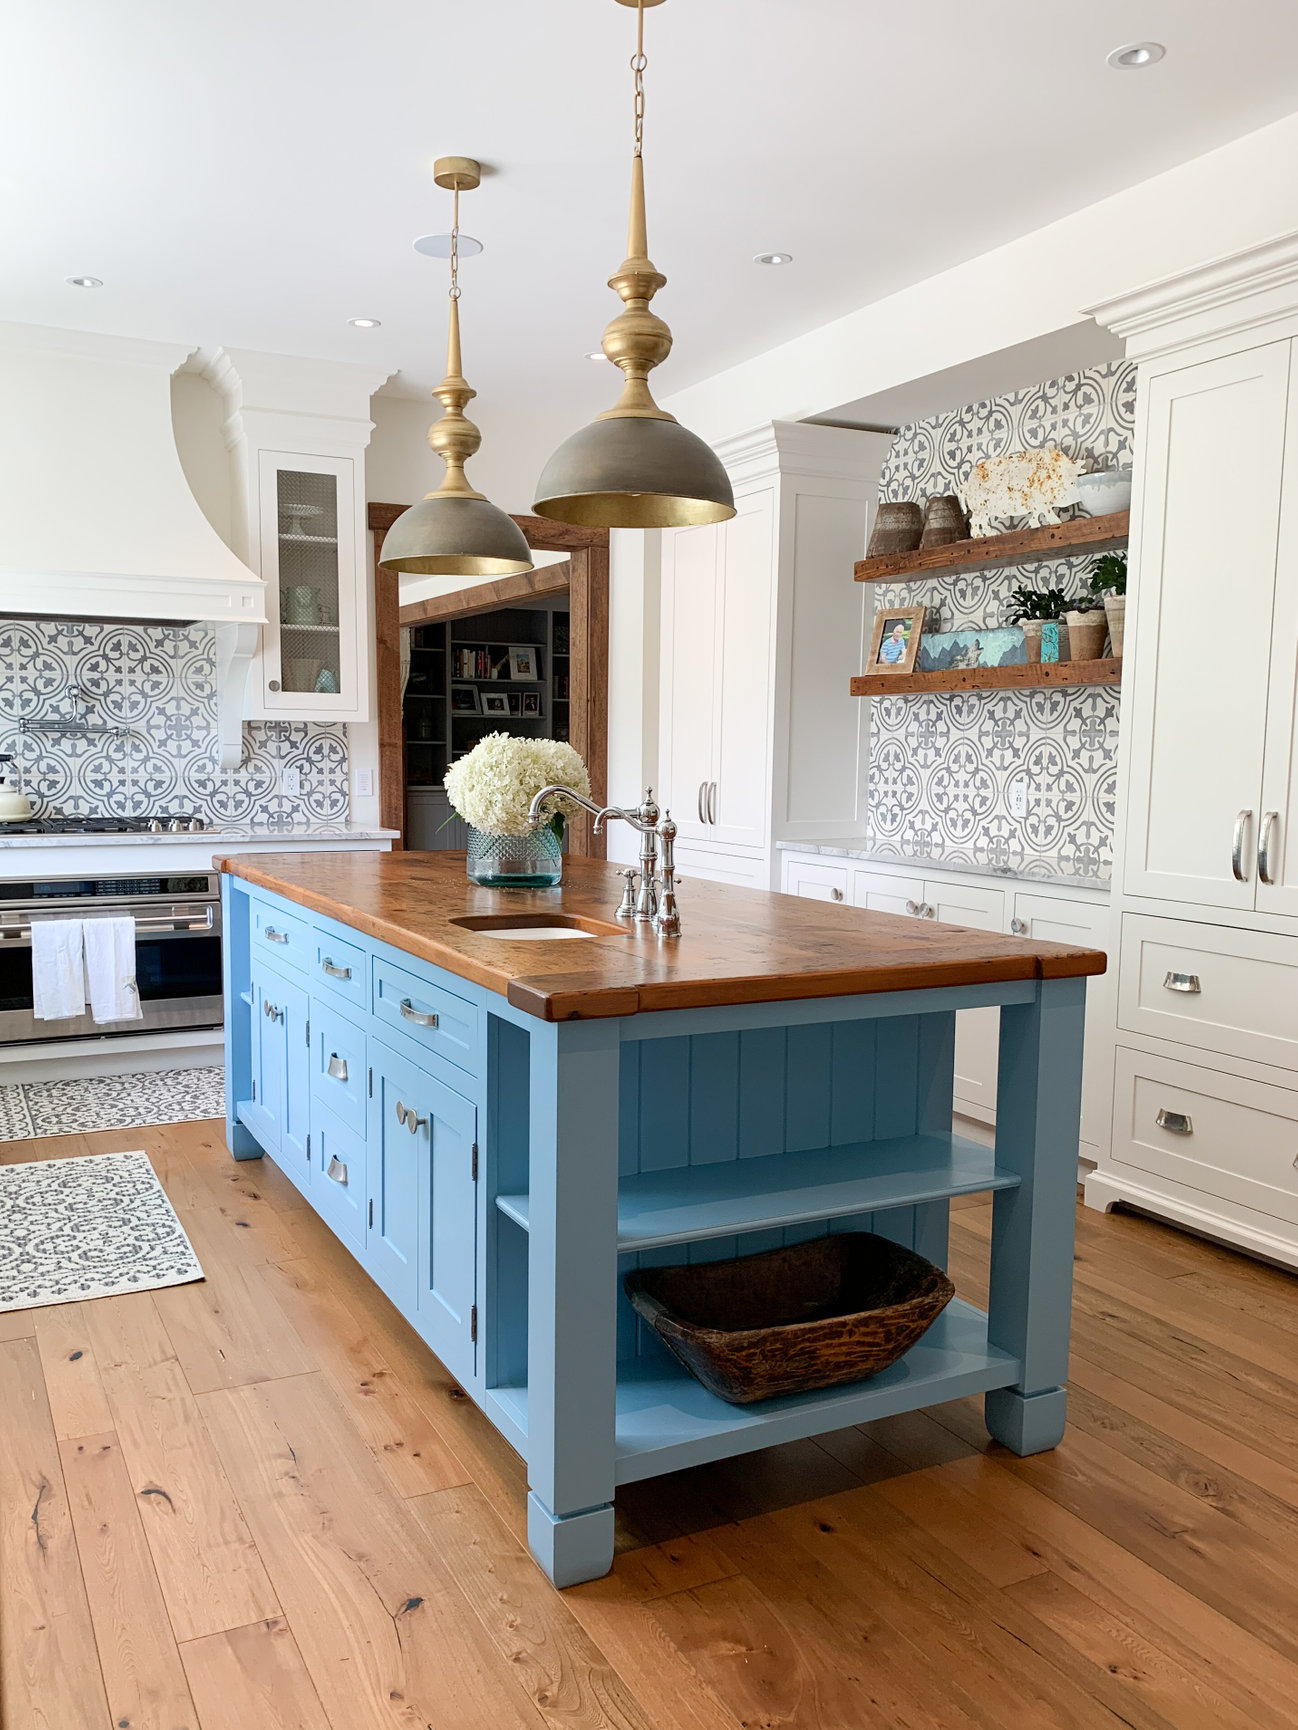 2022 Kitchen Décor Trends - Bloomsbury Fine Cabinetry Inc.